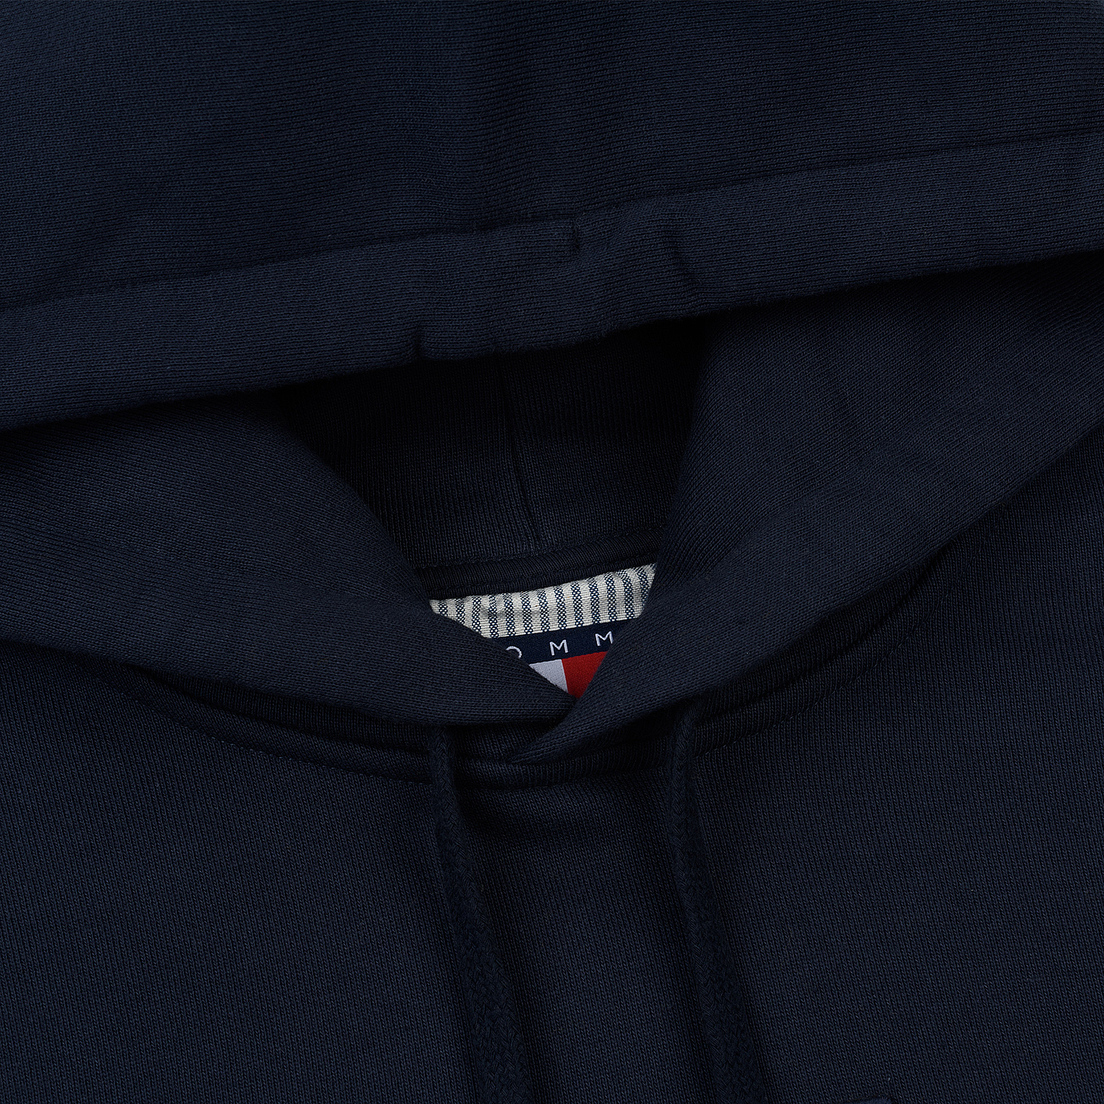 Tommy Jeans Женская толстовка Hoodie Expedition 6.0